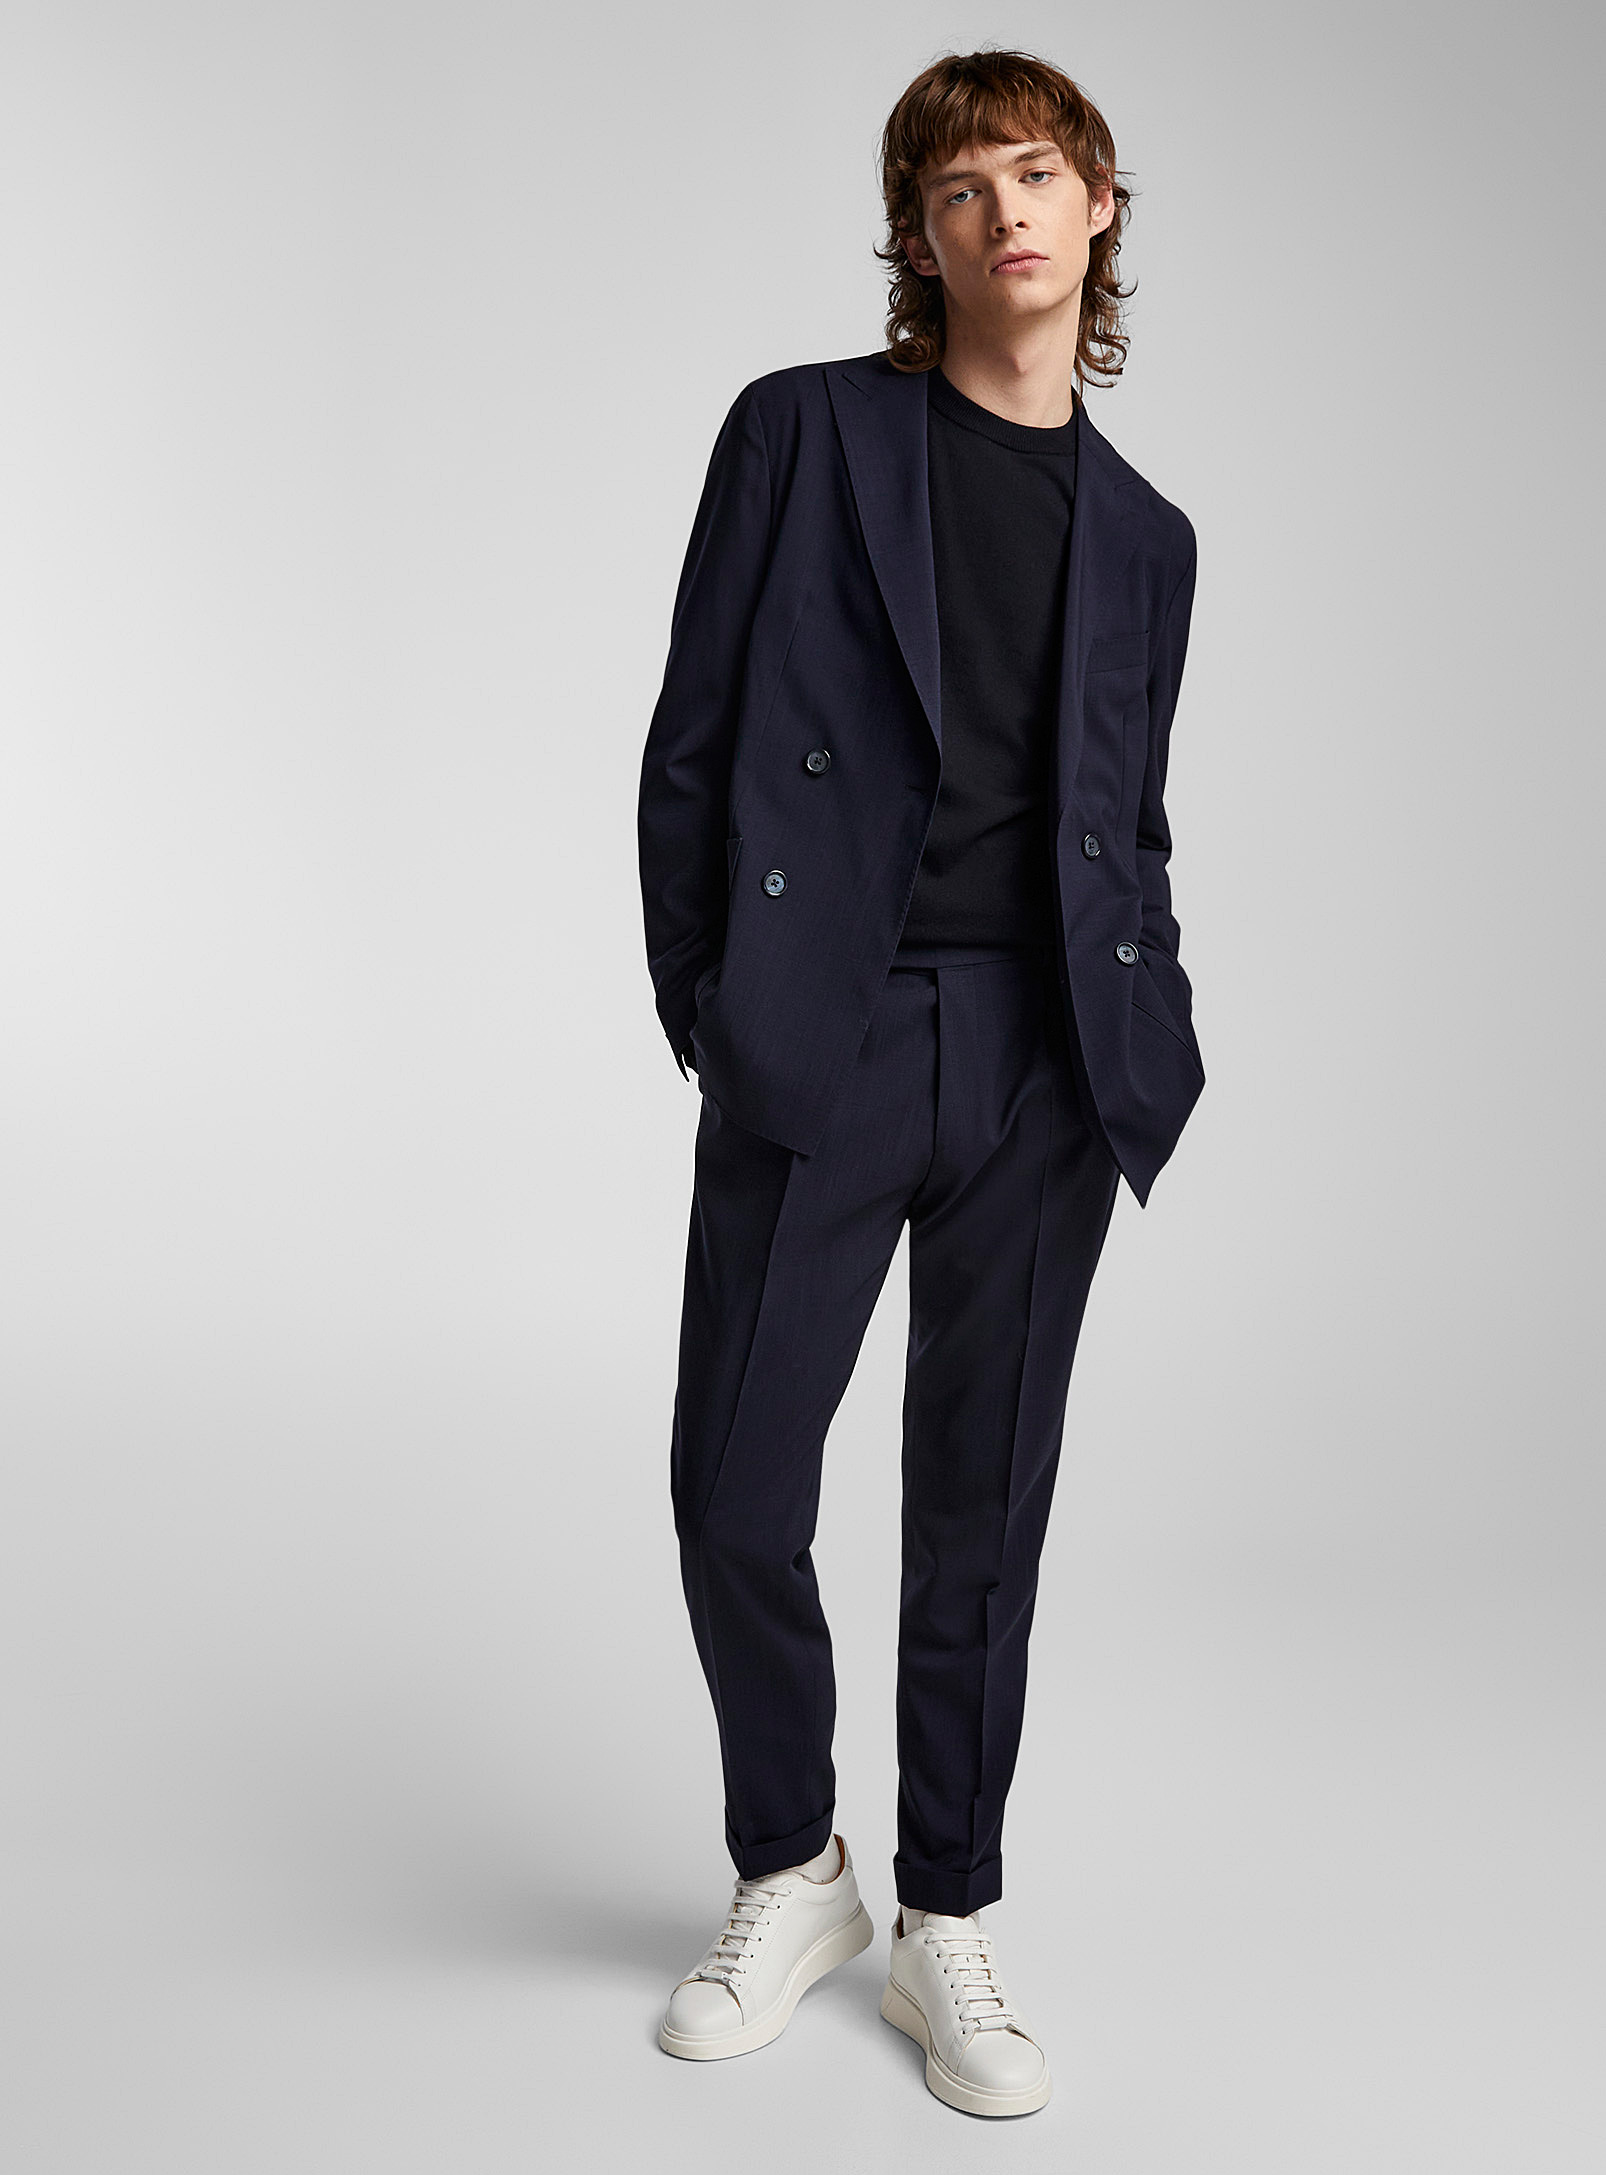 BOSS - Men's Navy double-breasted suit